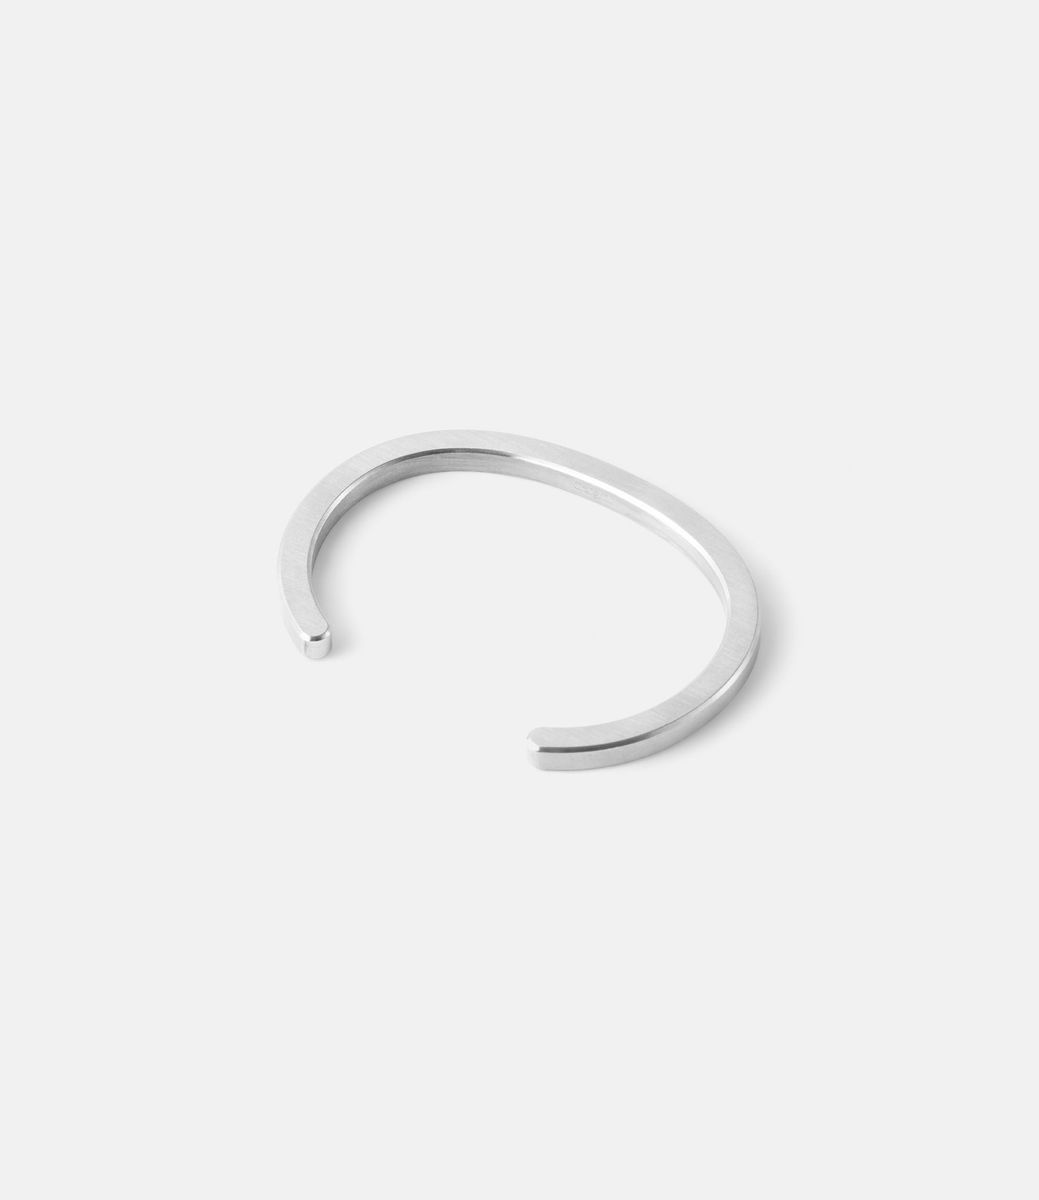 Craighill Radial Cuff Stainless Steel — браслет из стали